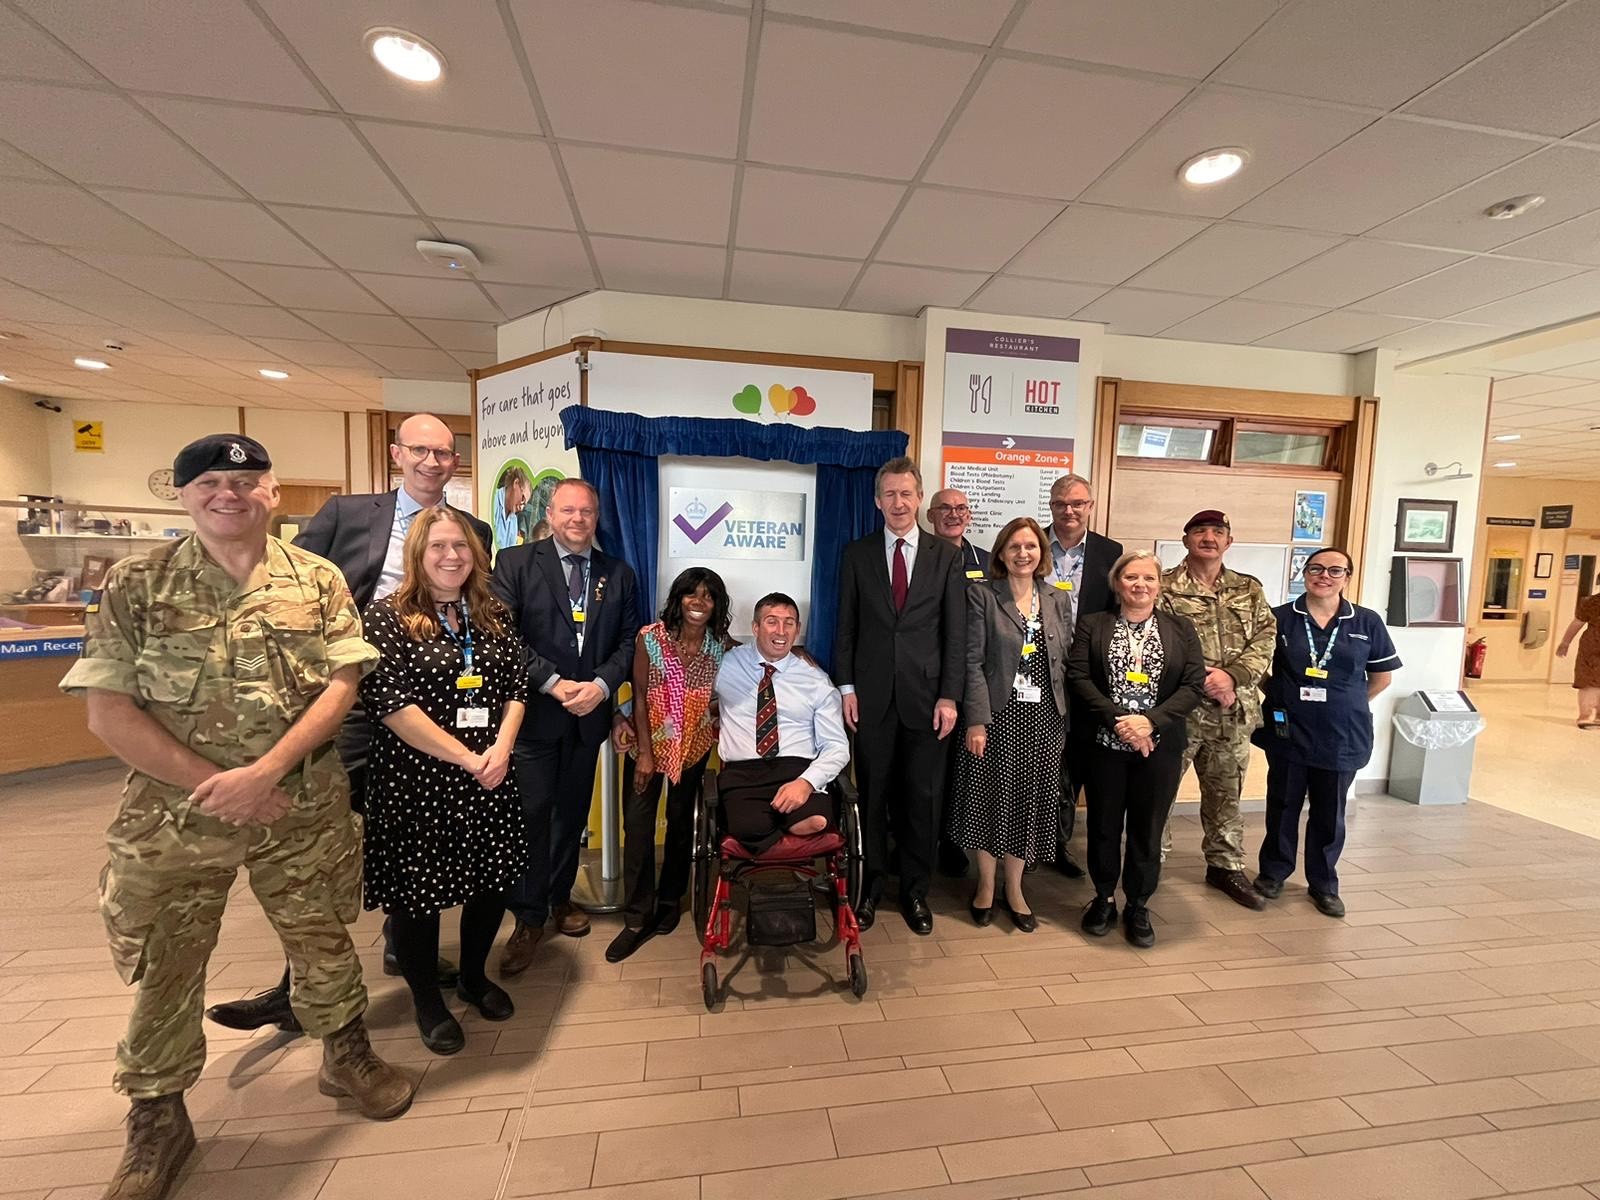 Dan Jarvis, MP for Barnsley Central stands with Ben Parkinson OBE and hospital staff in front of the Veteran Aware plaque